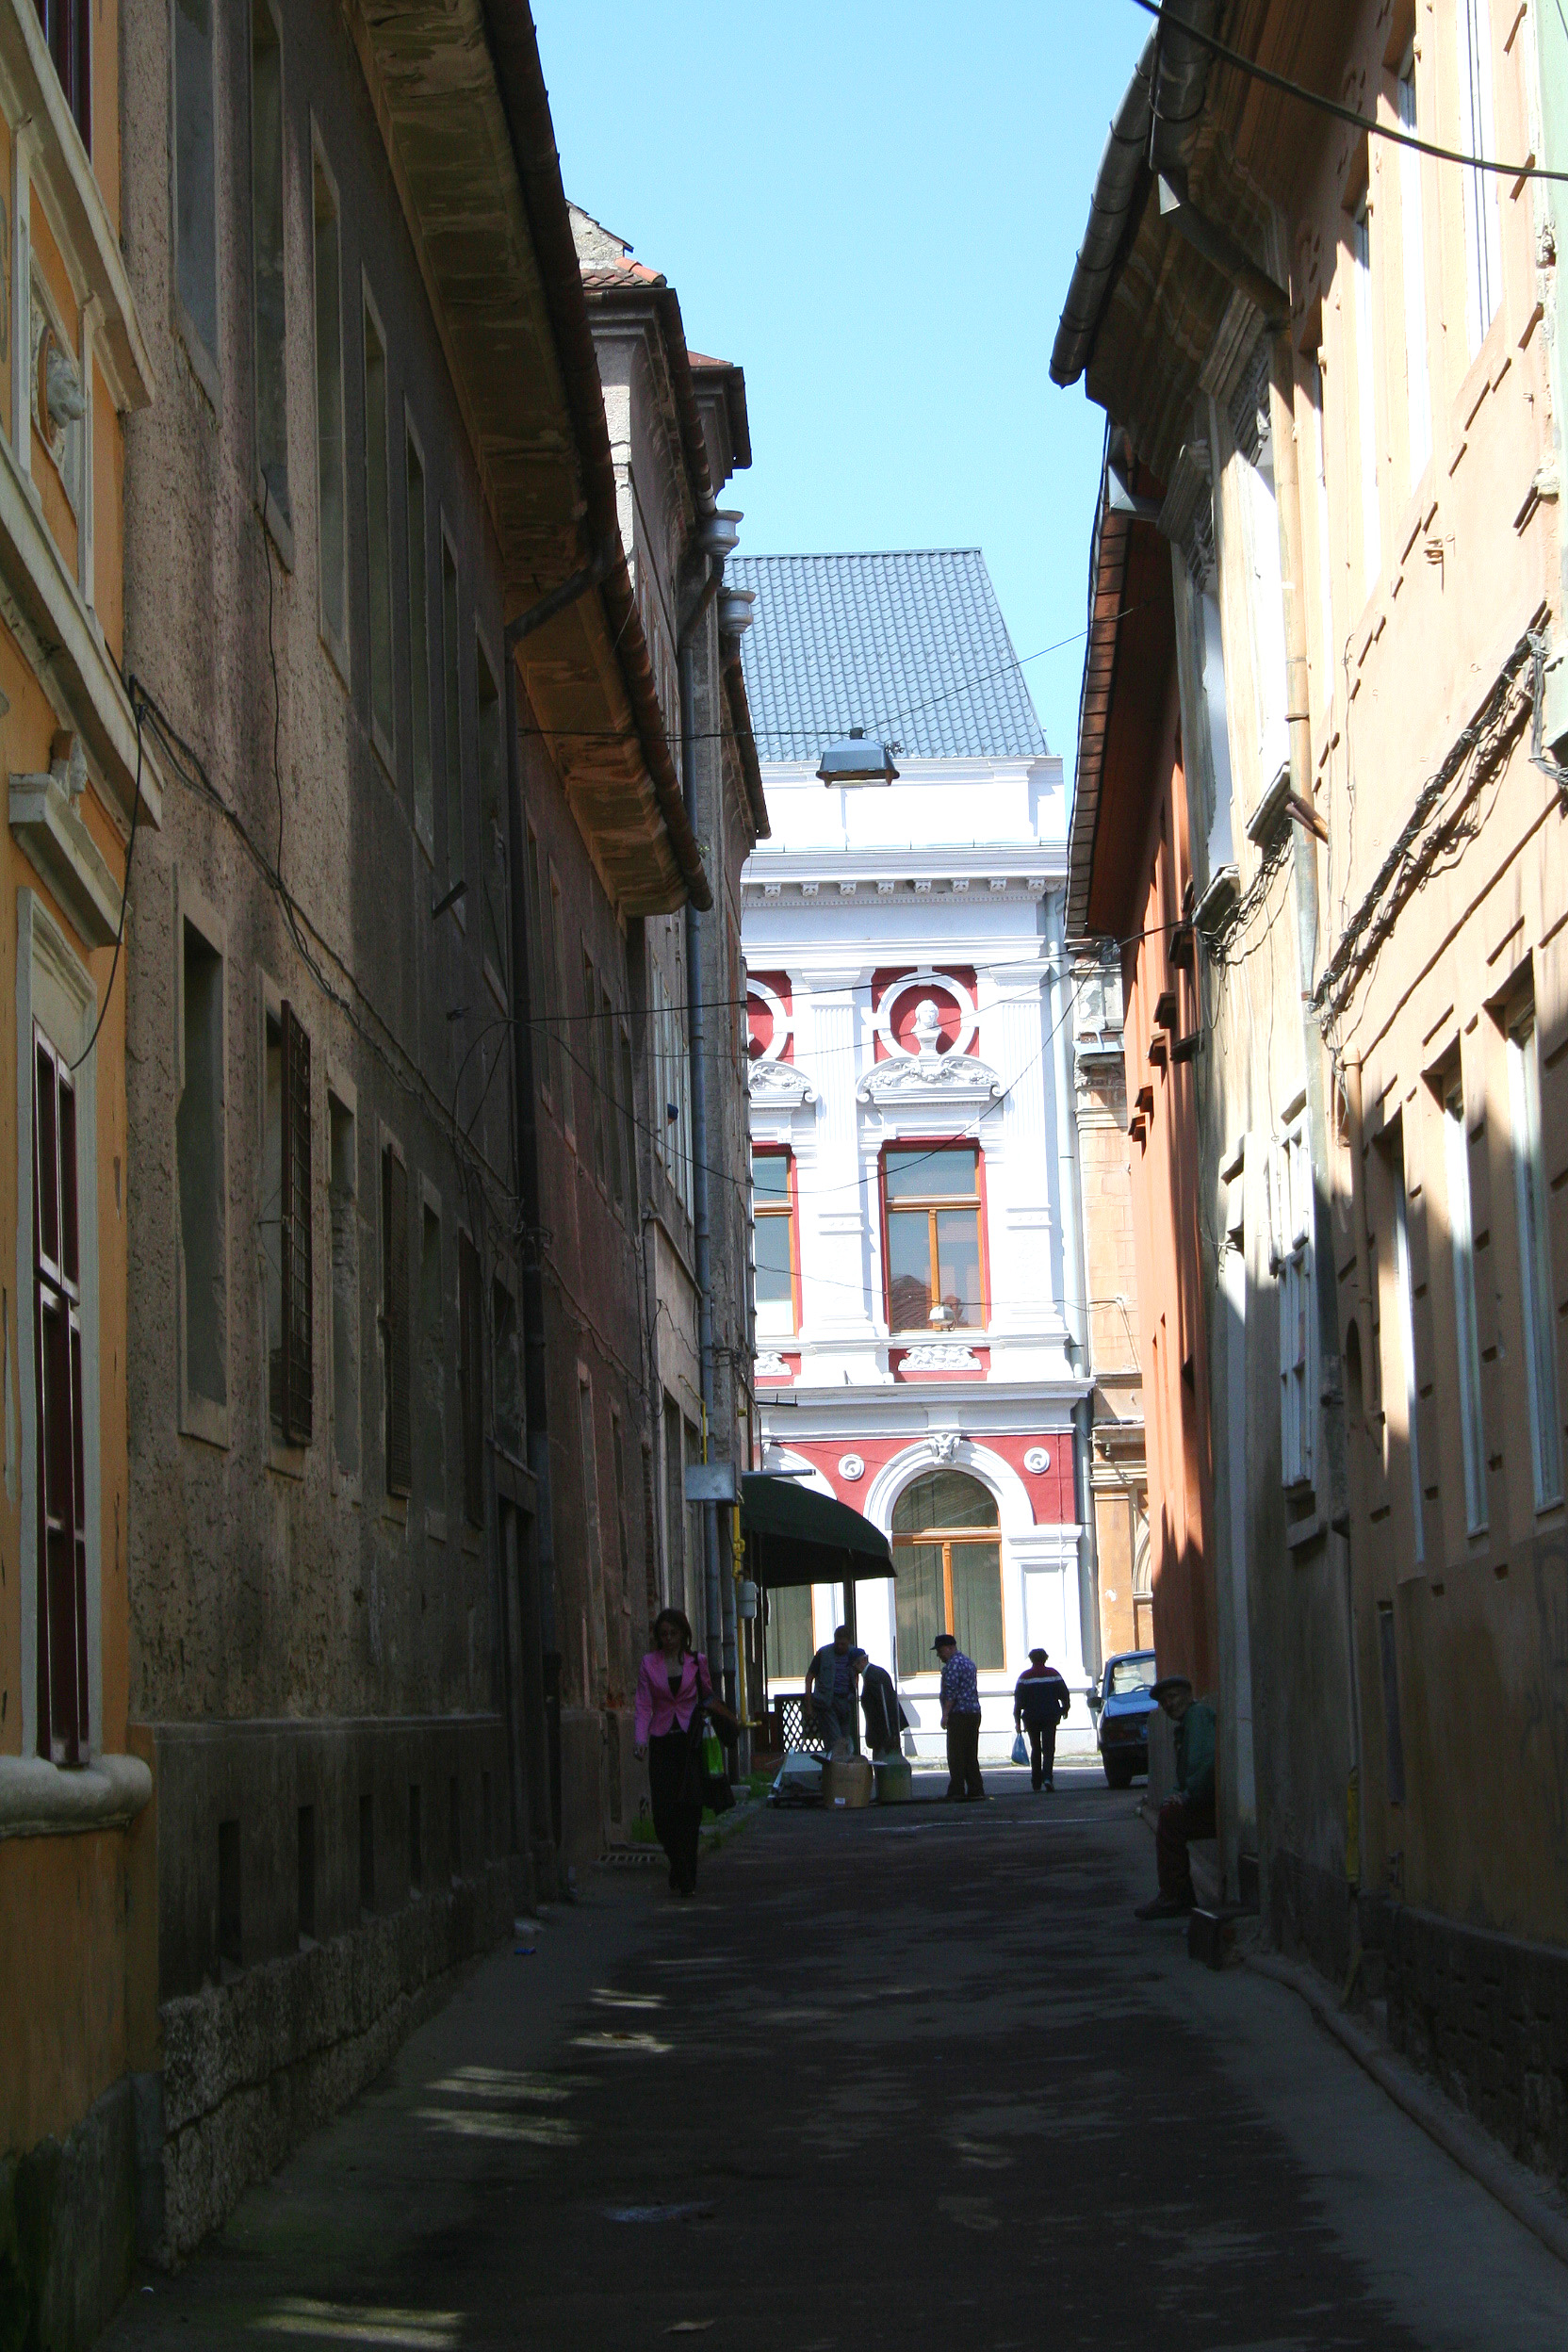 Nice architecture at the end of a narrow Brasov street!